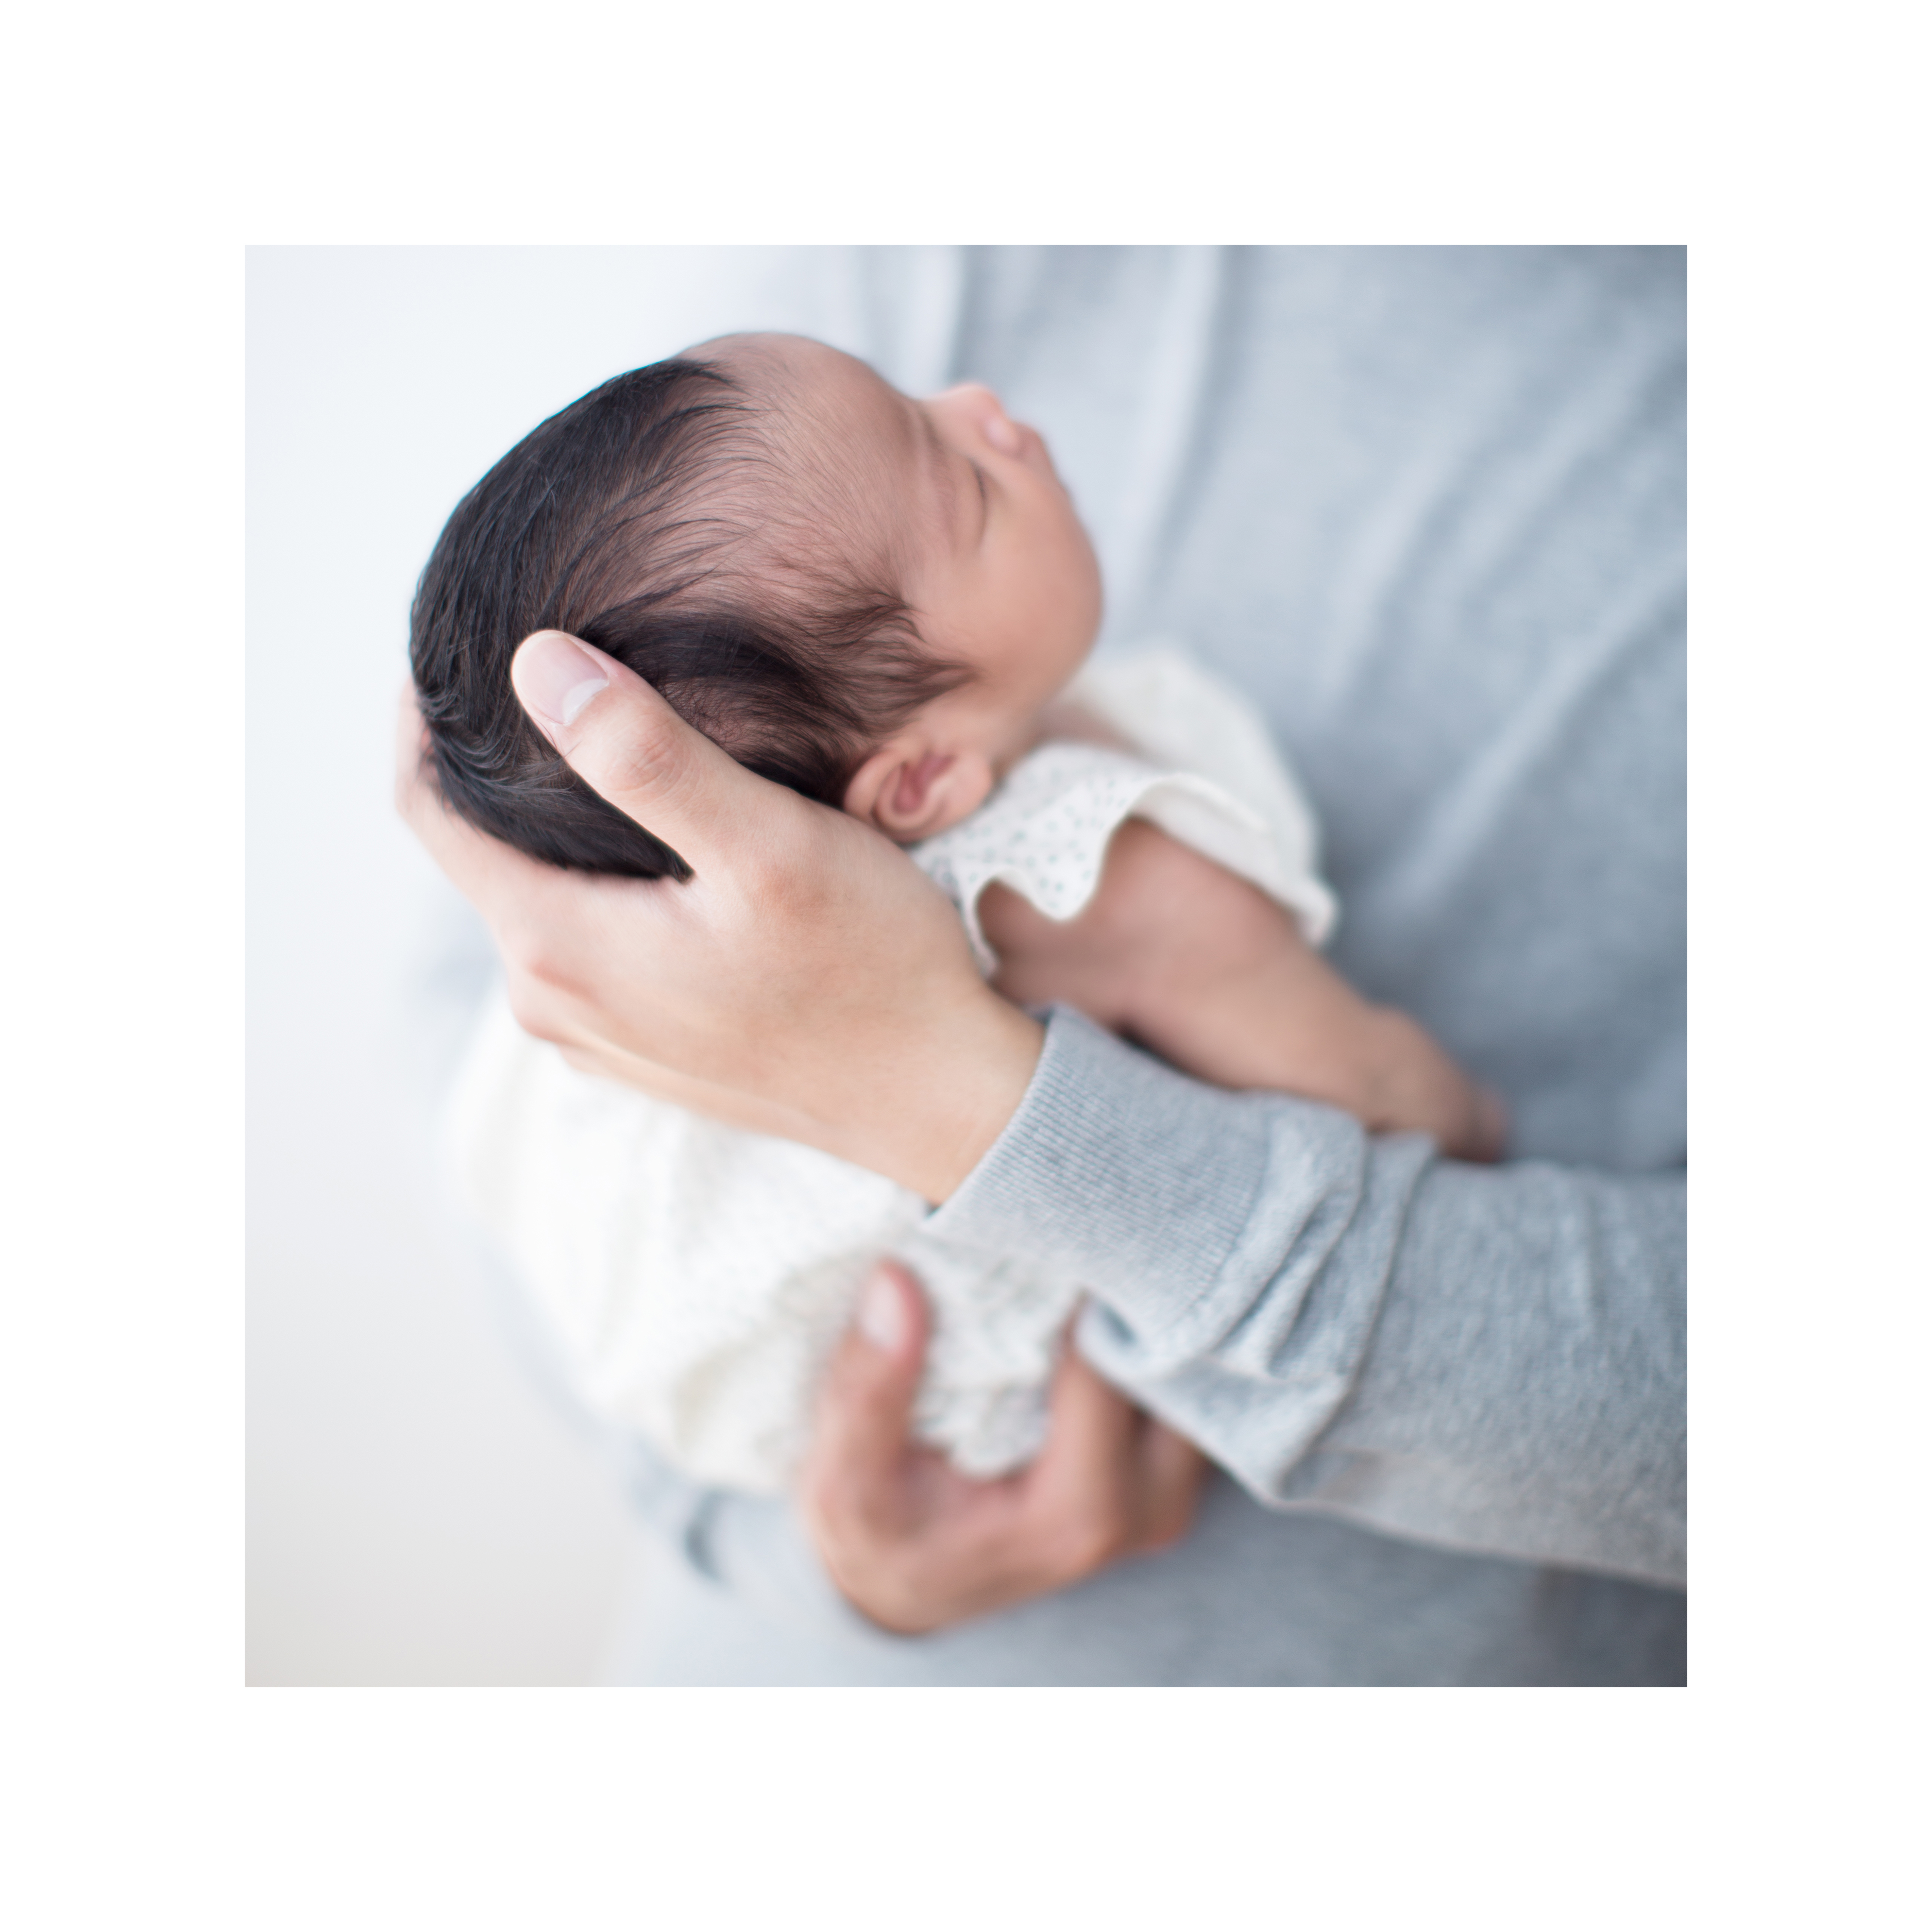 Newborn Photography by Maine Maternity and Newborn Photographer Tiffany Farley, http://tiffanyfarley.com